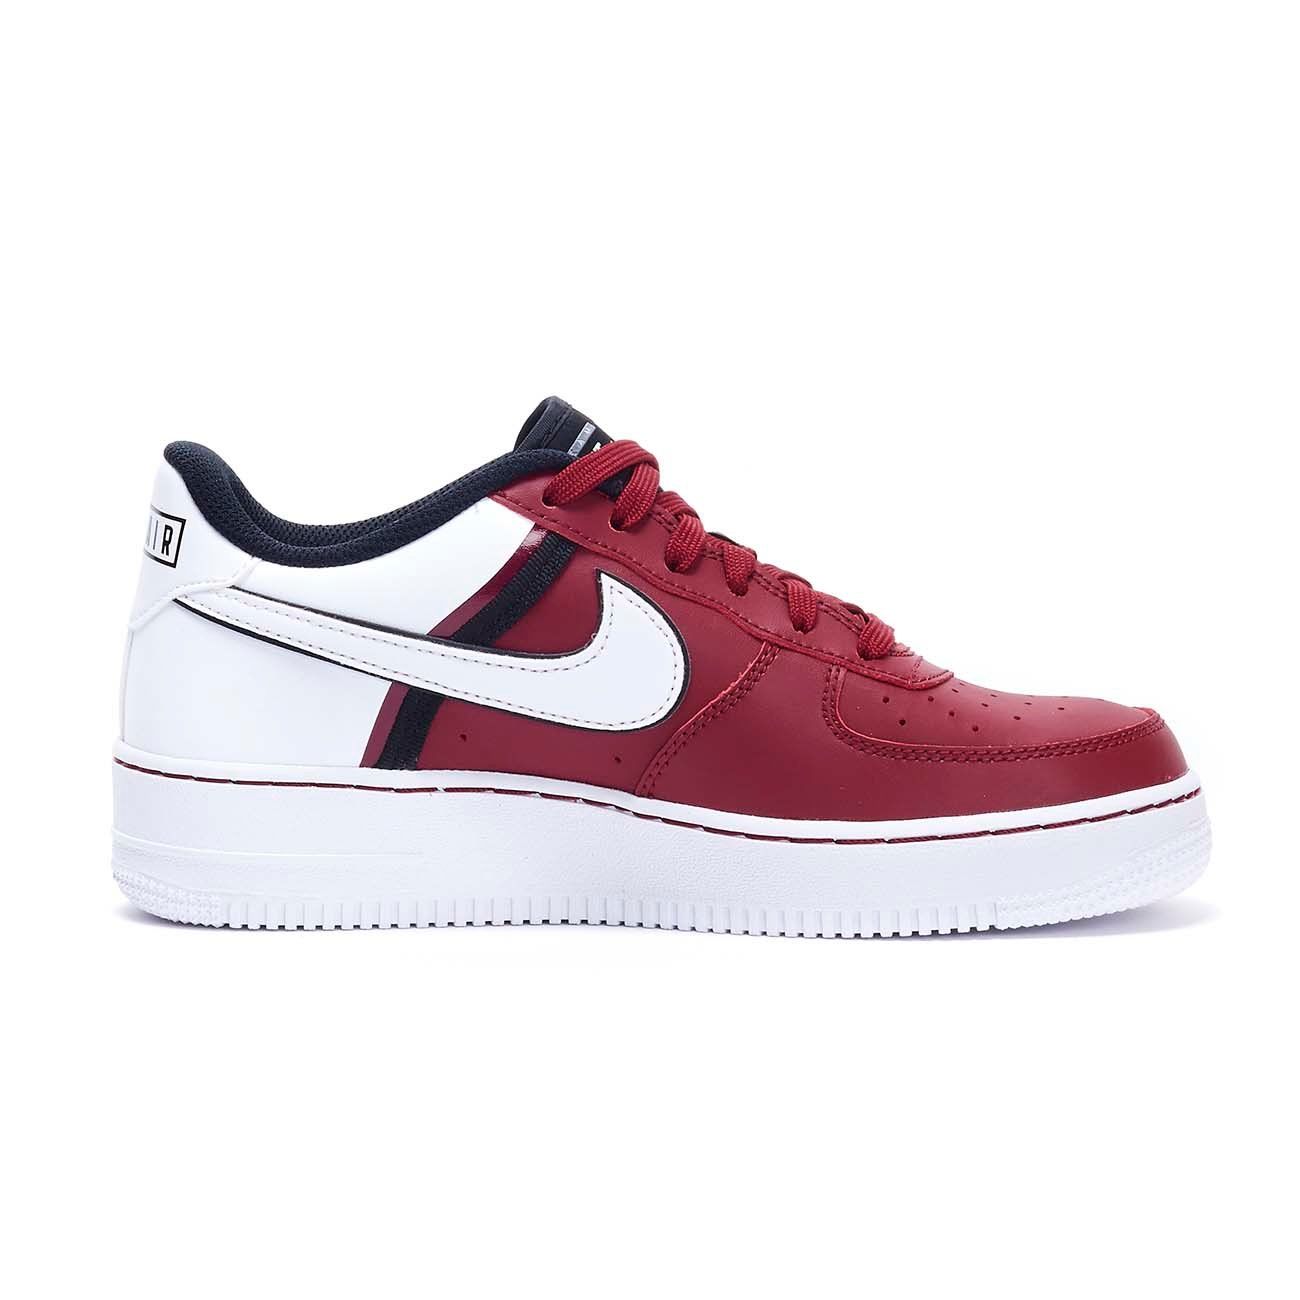 red and white air force 1 lv8